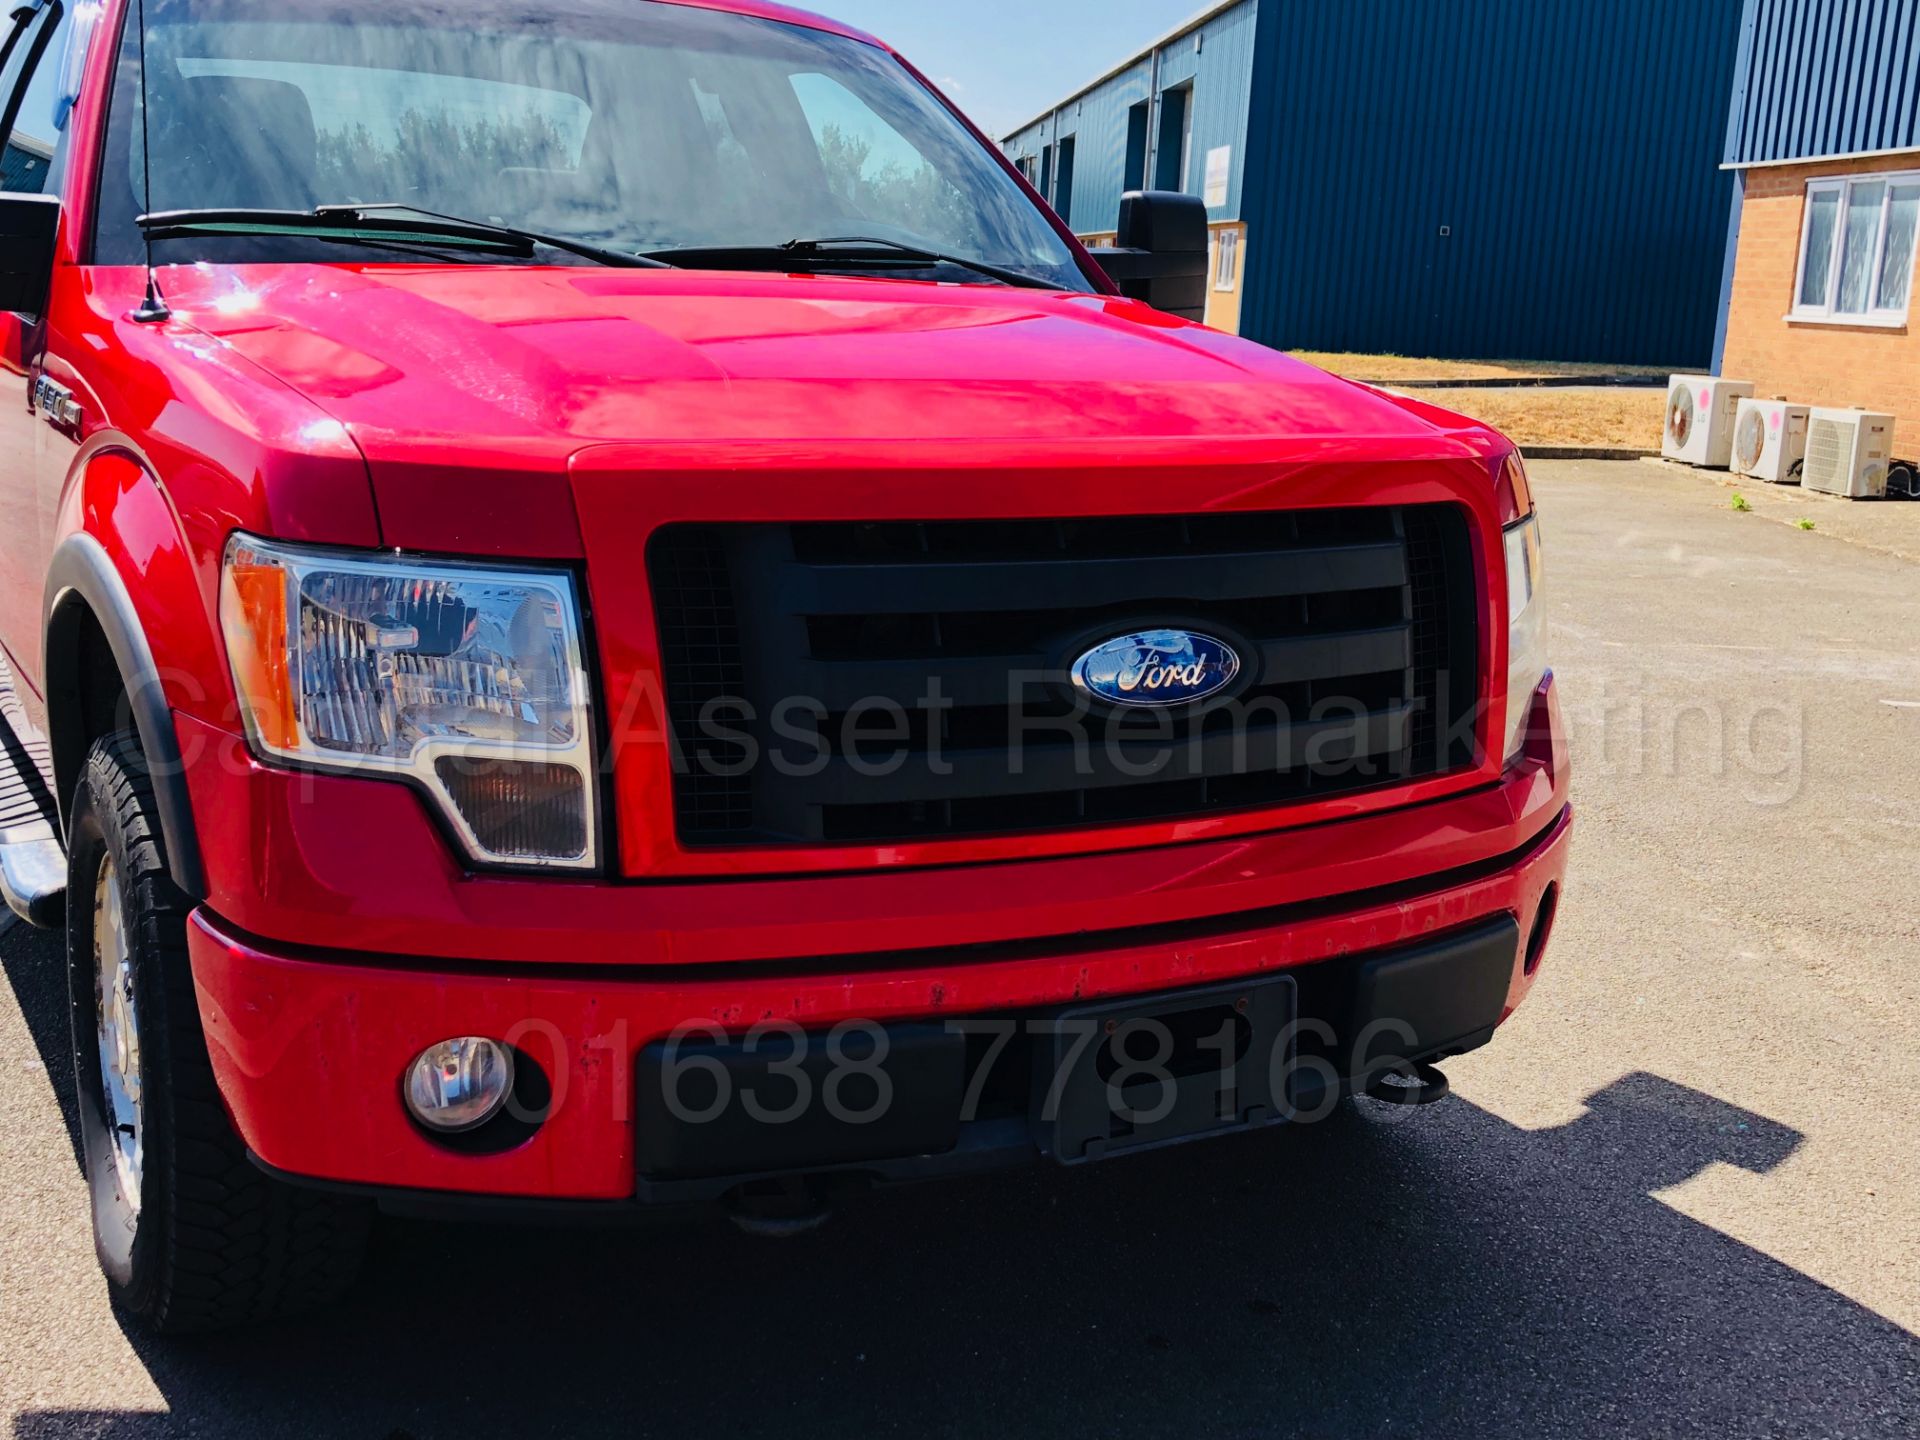 (On Sale) FORD F-150 **FX-4 EDITION** KING CAB '6 SEATER' (2010) '5.4L V8 - AUTO - 4X4' *HUGE SPEC* - Image 17 of 47